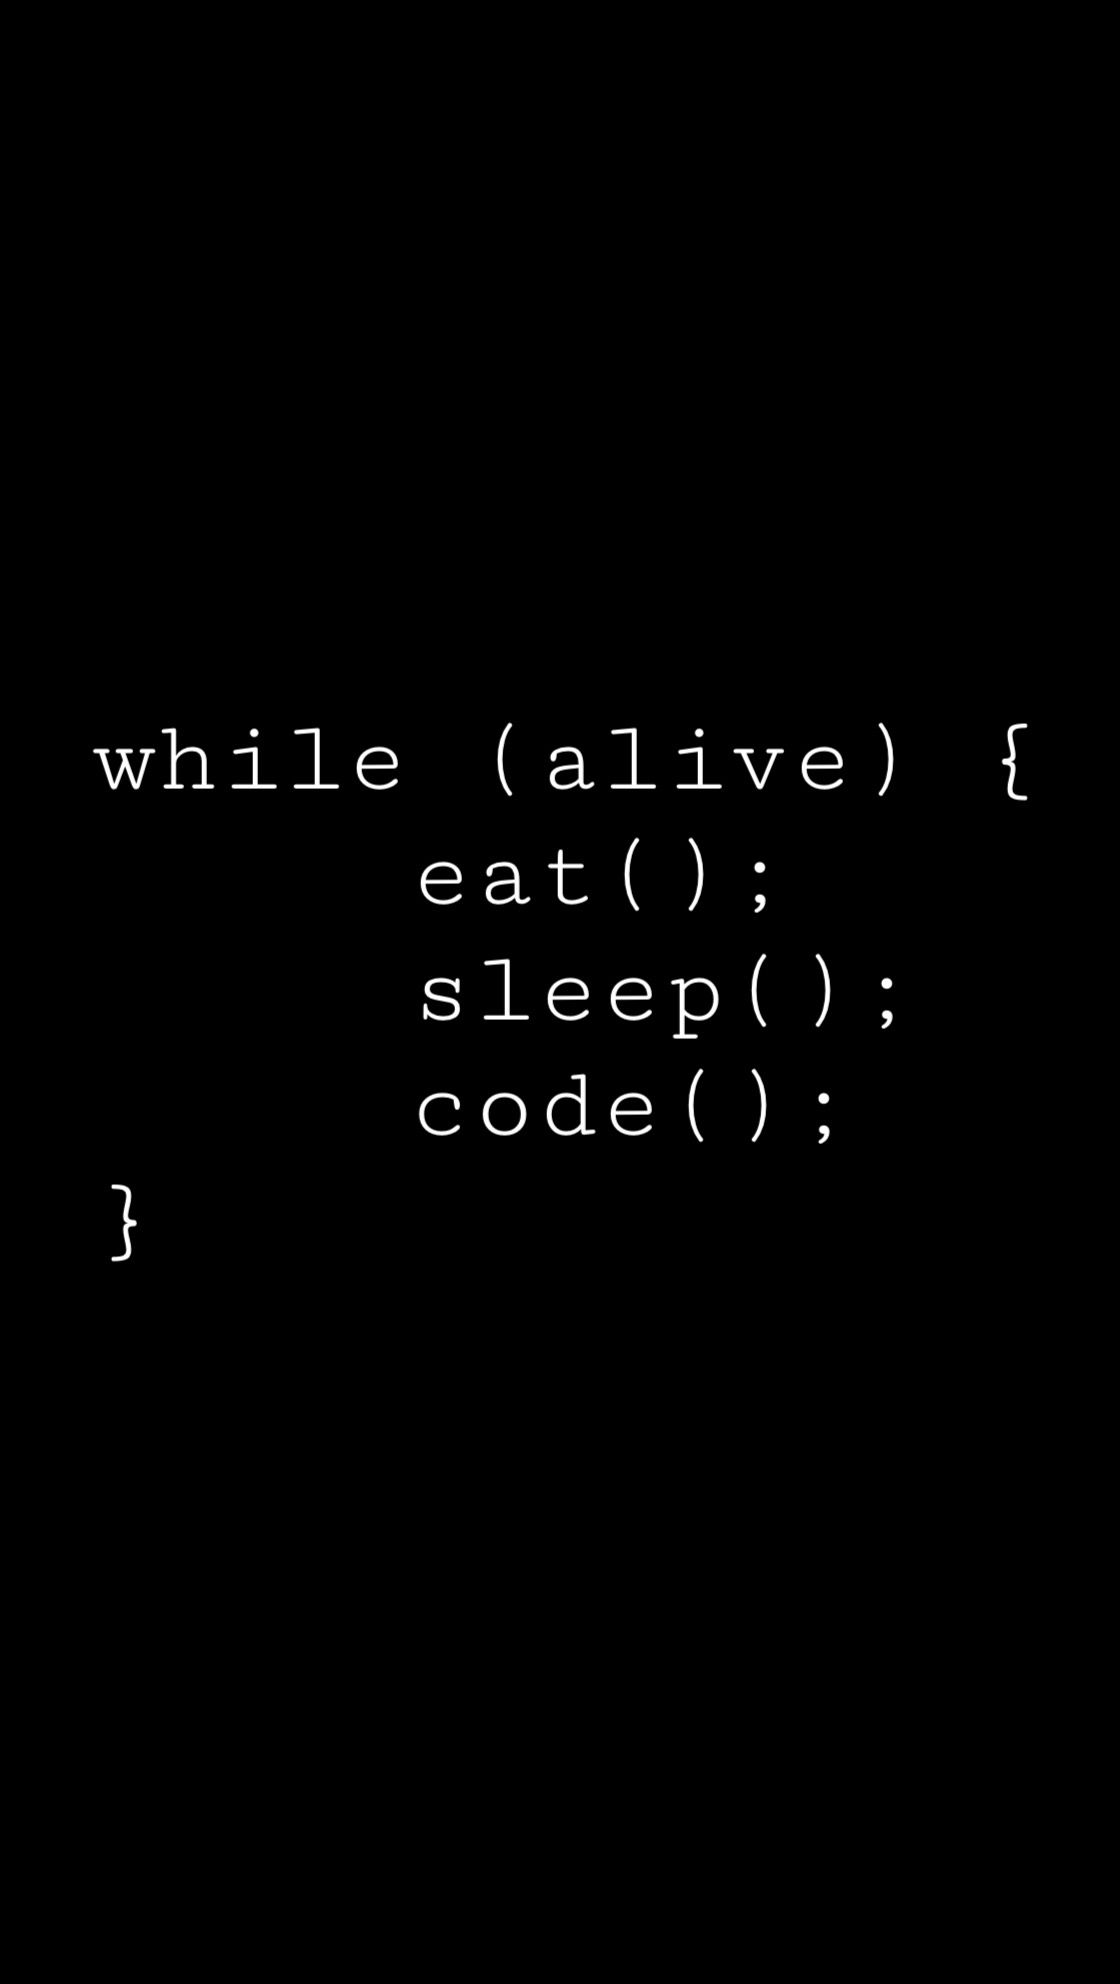 Programmer While Alive Eat Sleep Code Puter Wallpaper Black And